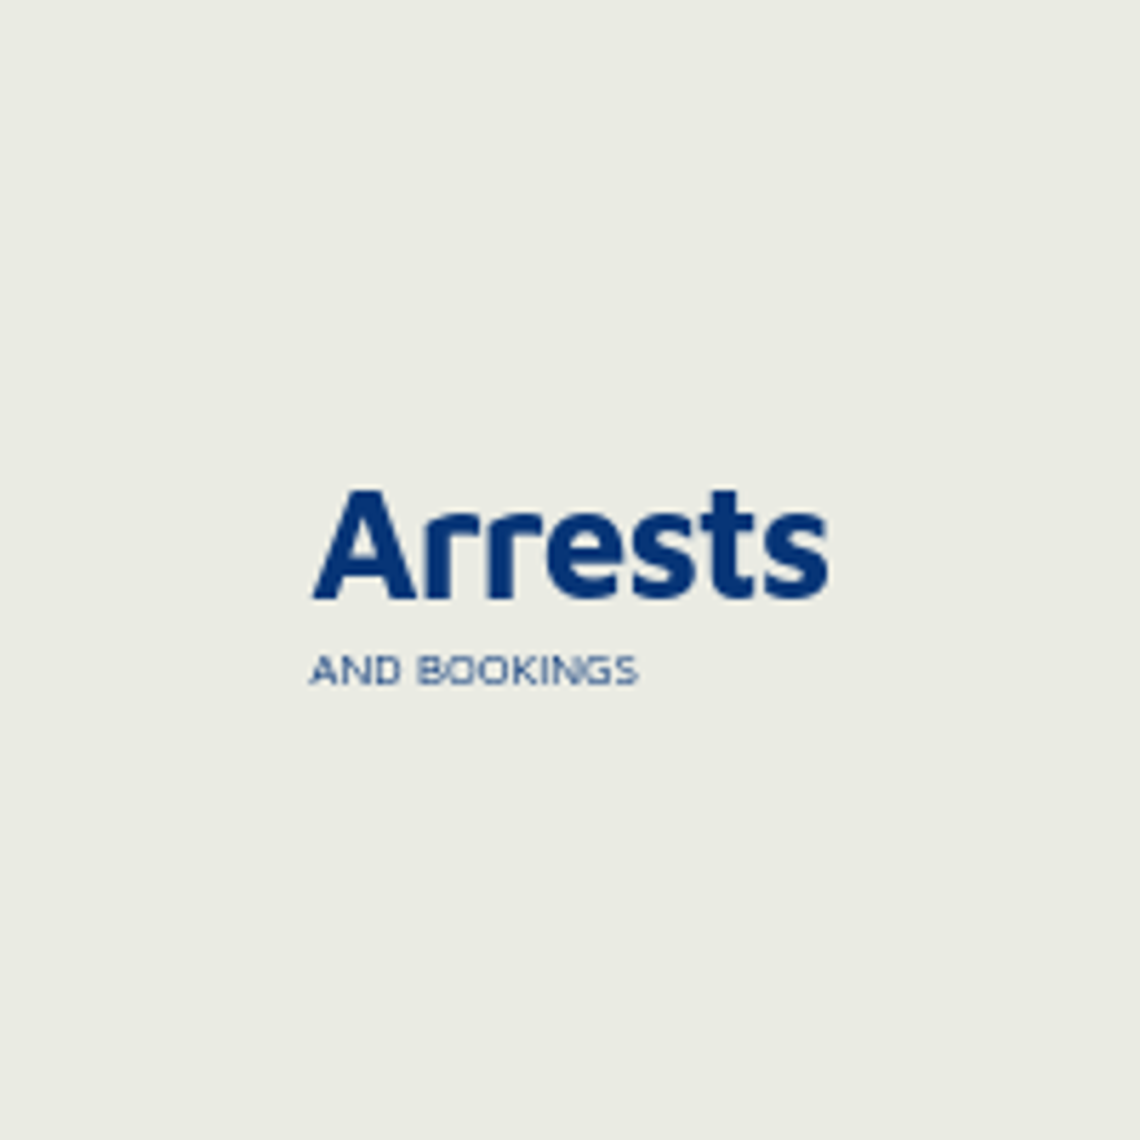 Arrests/Bookings through September 8th